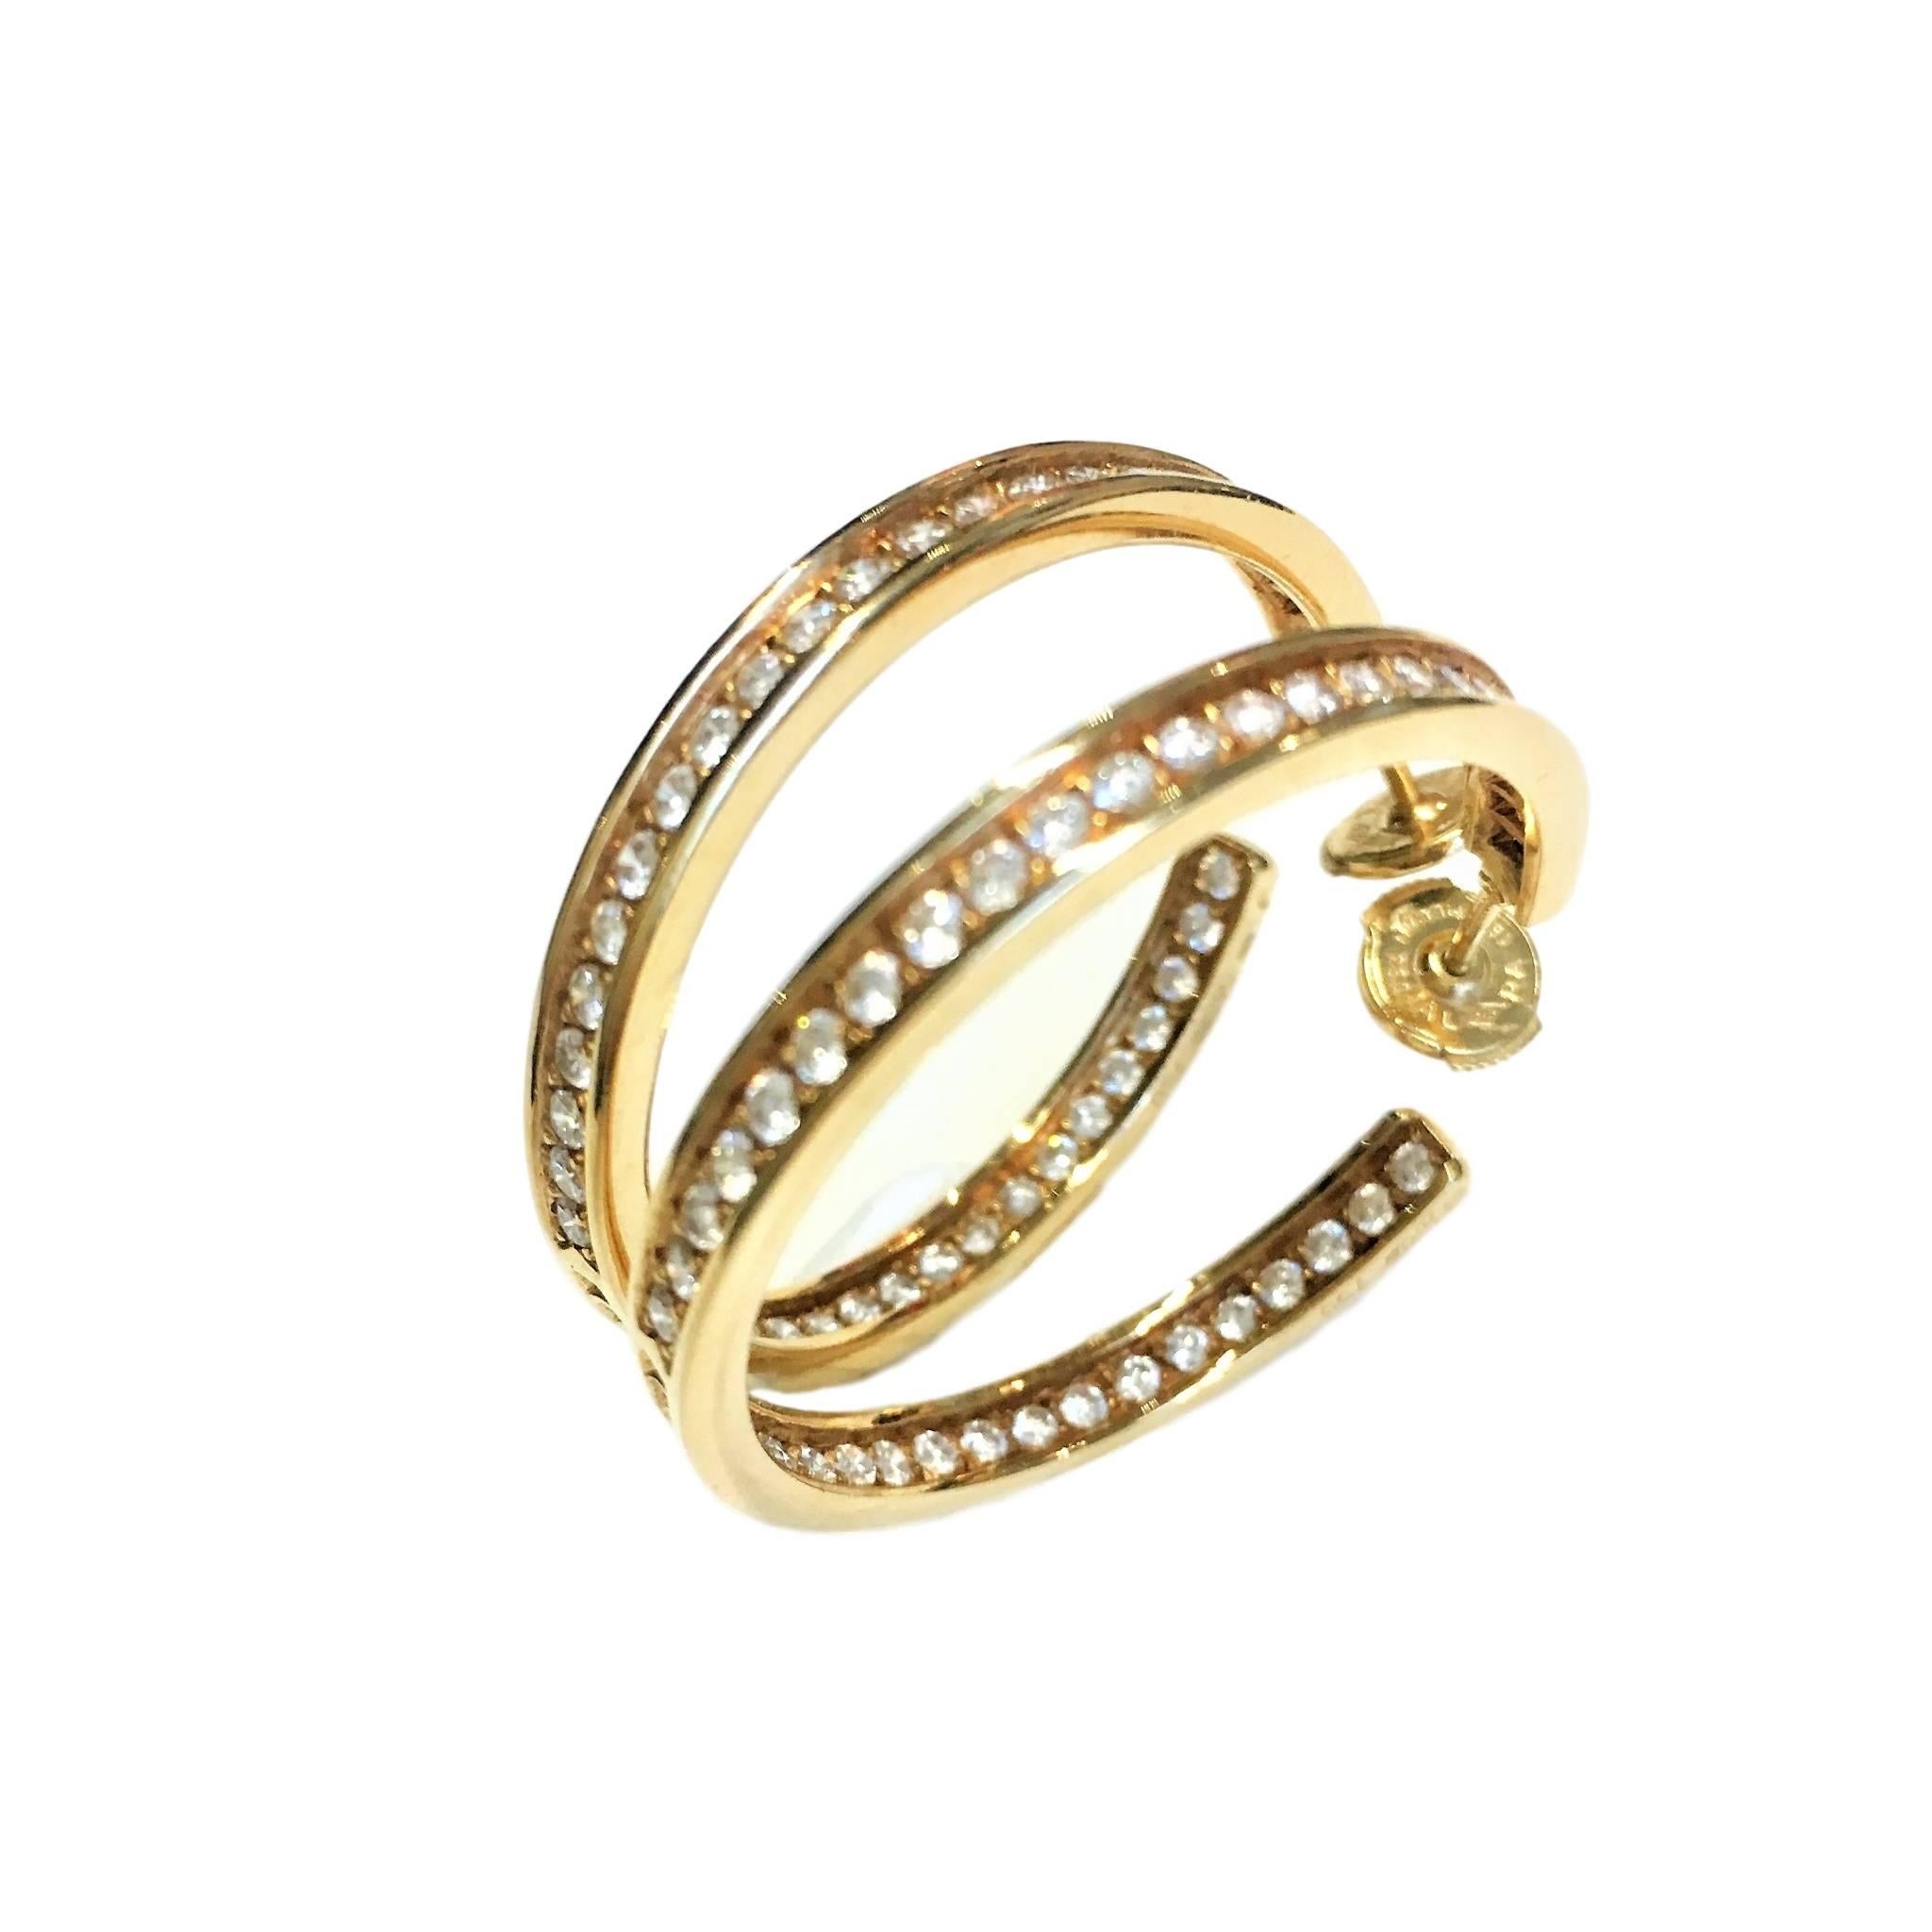 18k yellow gold Cartier diamond hoop earrings. Each set with round brilliant cut diamonds.
Total weight of approximately 3ct,  The earrings measure 34mm in height and 2.5mm in width and 
Posts with alpa back fittings. 
Signed Cartier. Numbered.